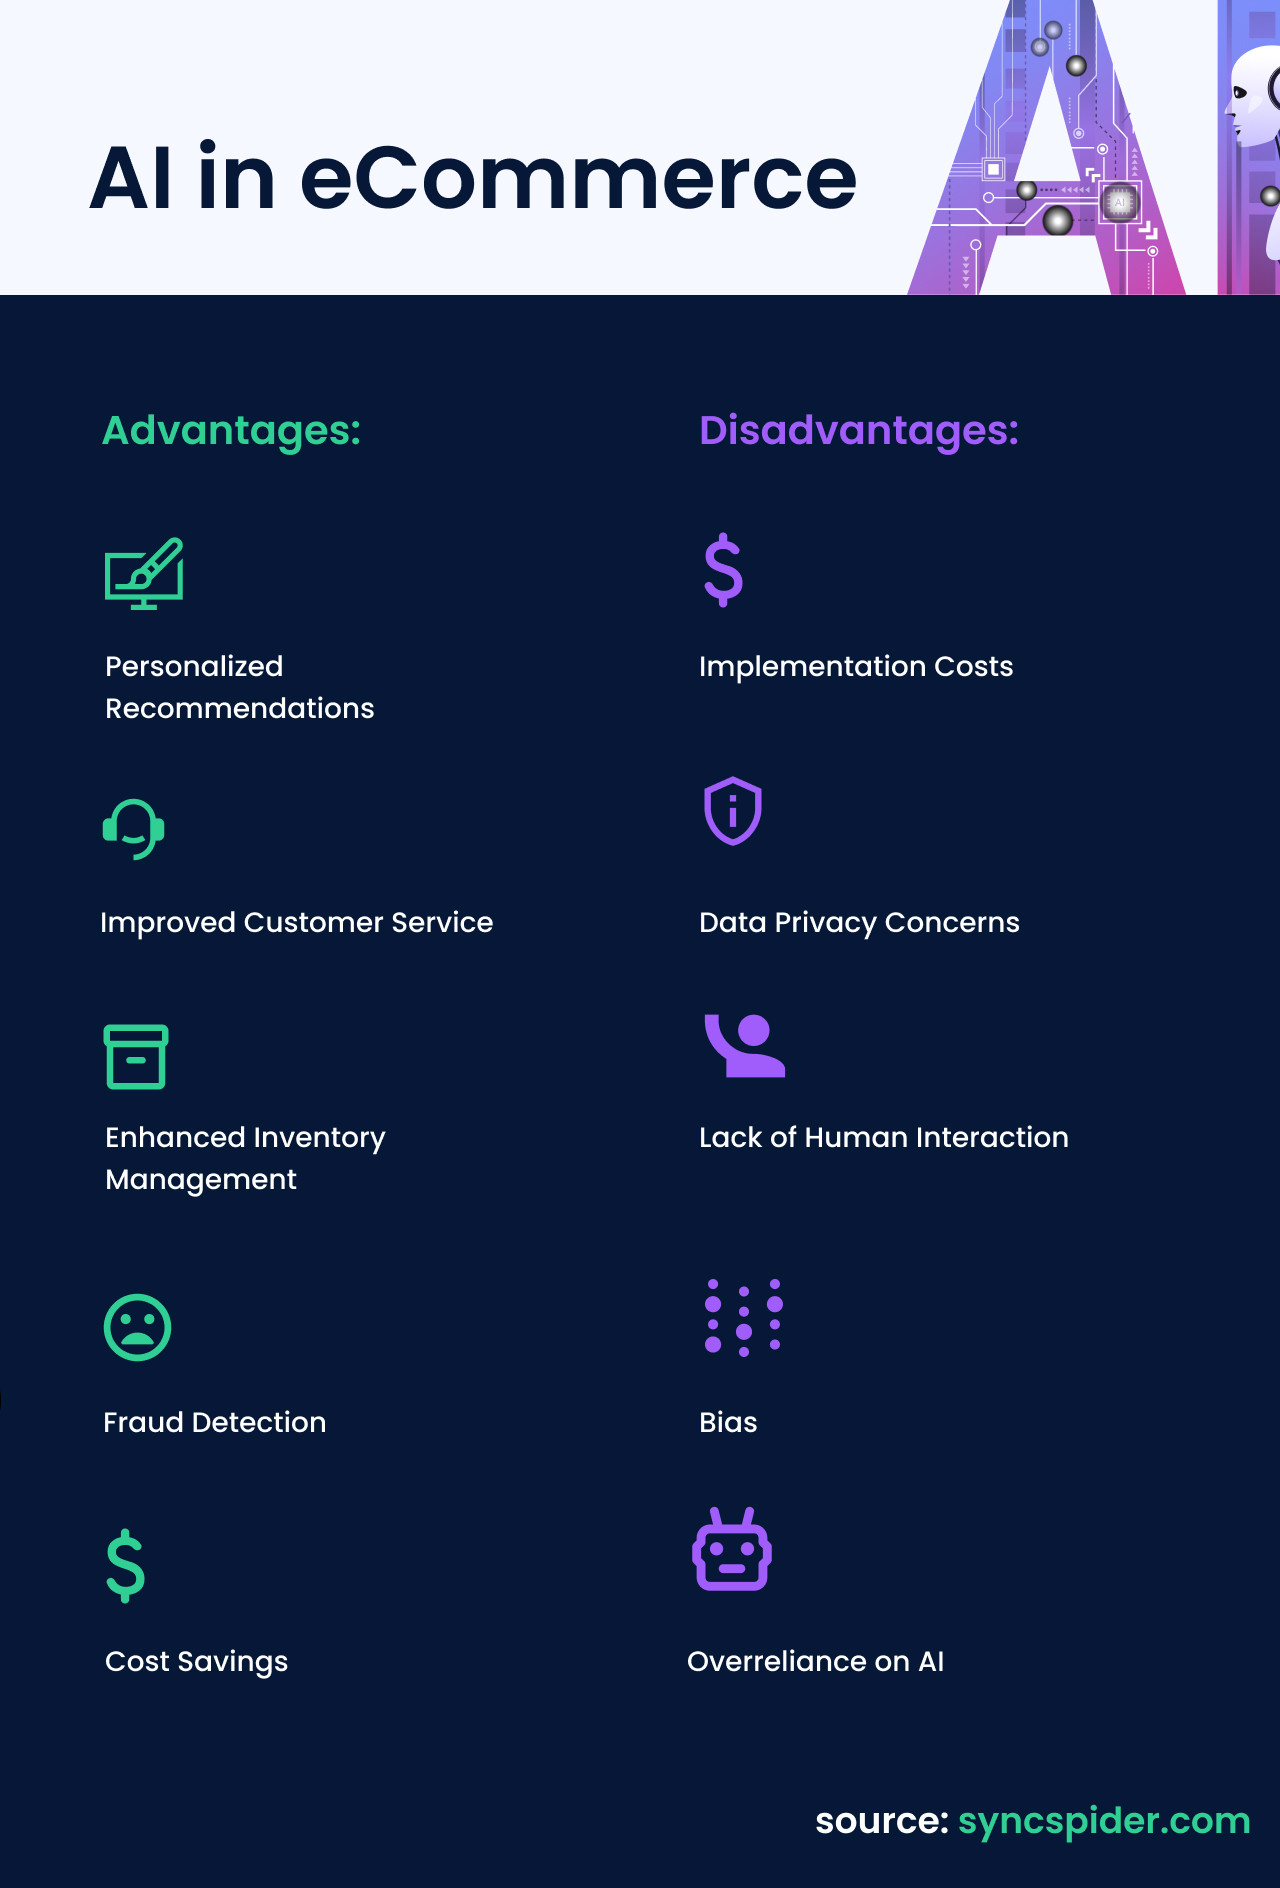 Infographic shows the benefits of using AI in eCommerce. Present 5 advantages on the left side and 5 disadvantages on the right side. This infographic provides a clear and visually appealing overview of the role of AI in eCommerce.